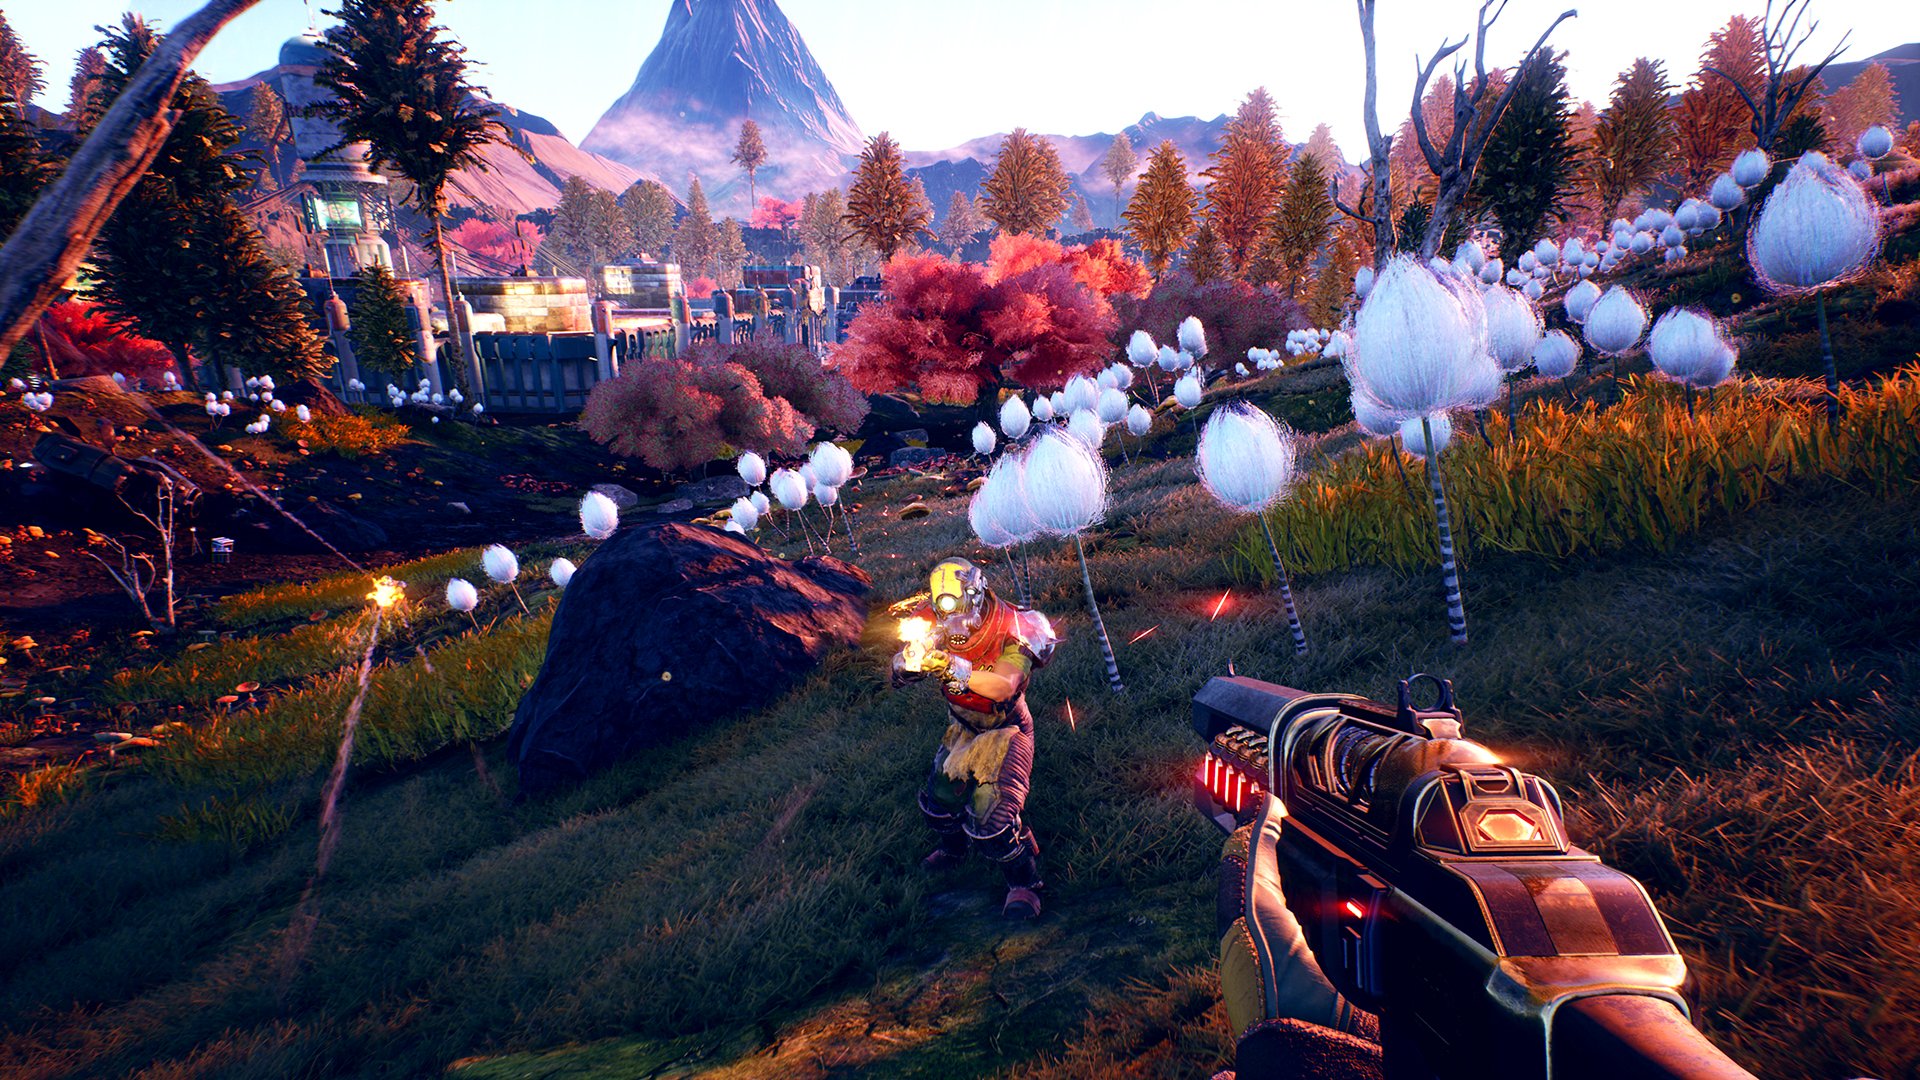 Screenshot for the game The Outer Worlds [v 1.4.1.617 (42134) +DLC] (2019) download torrent RePack from R. G. Mechanics